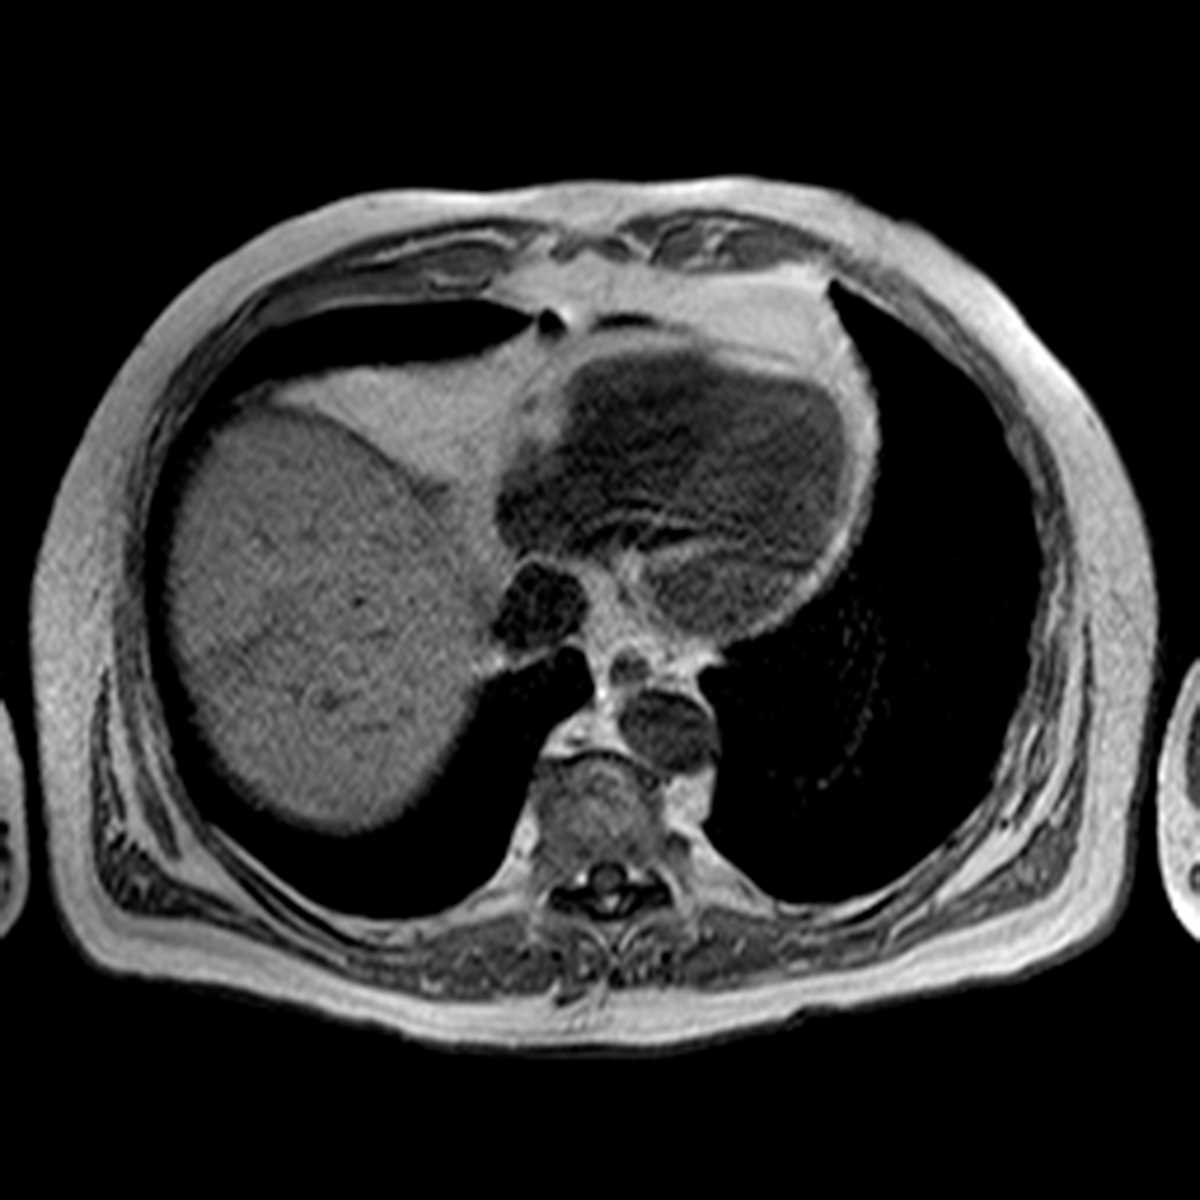 Focal fatty sparing of liver - CTisus CT Scan